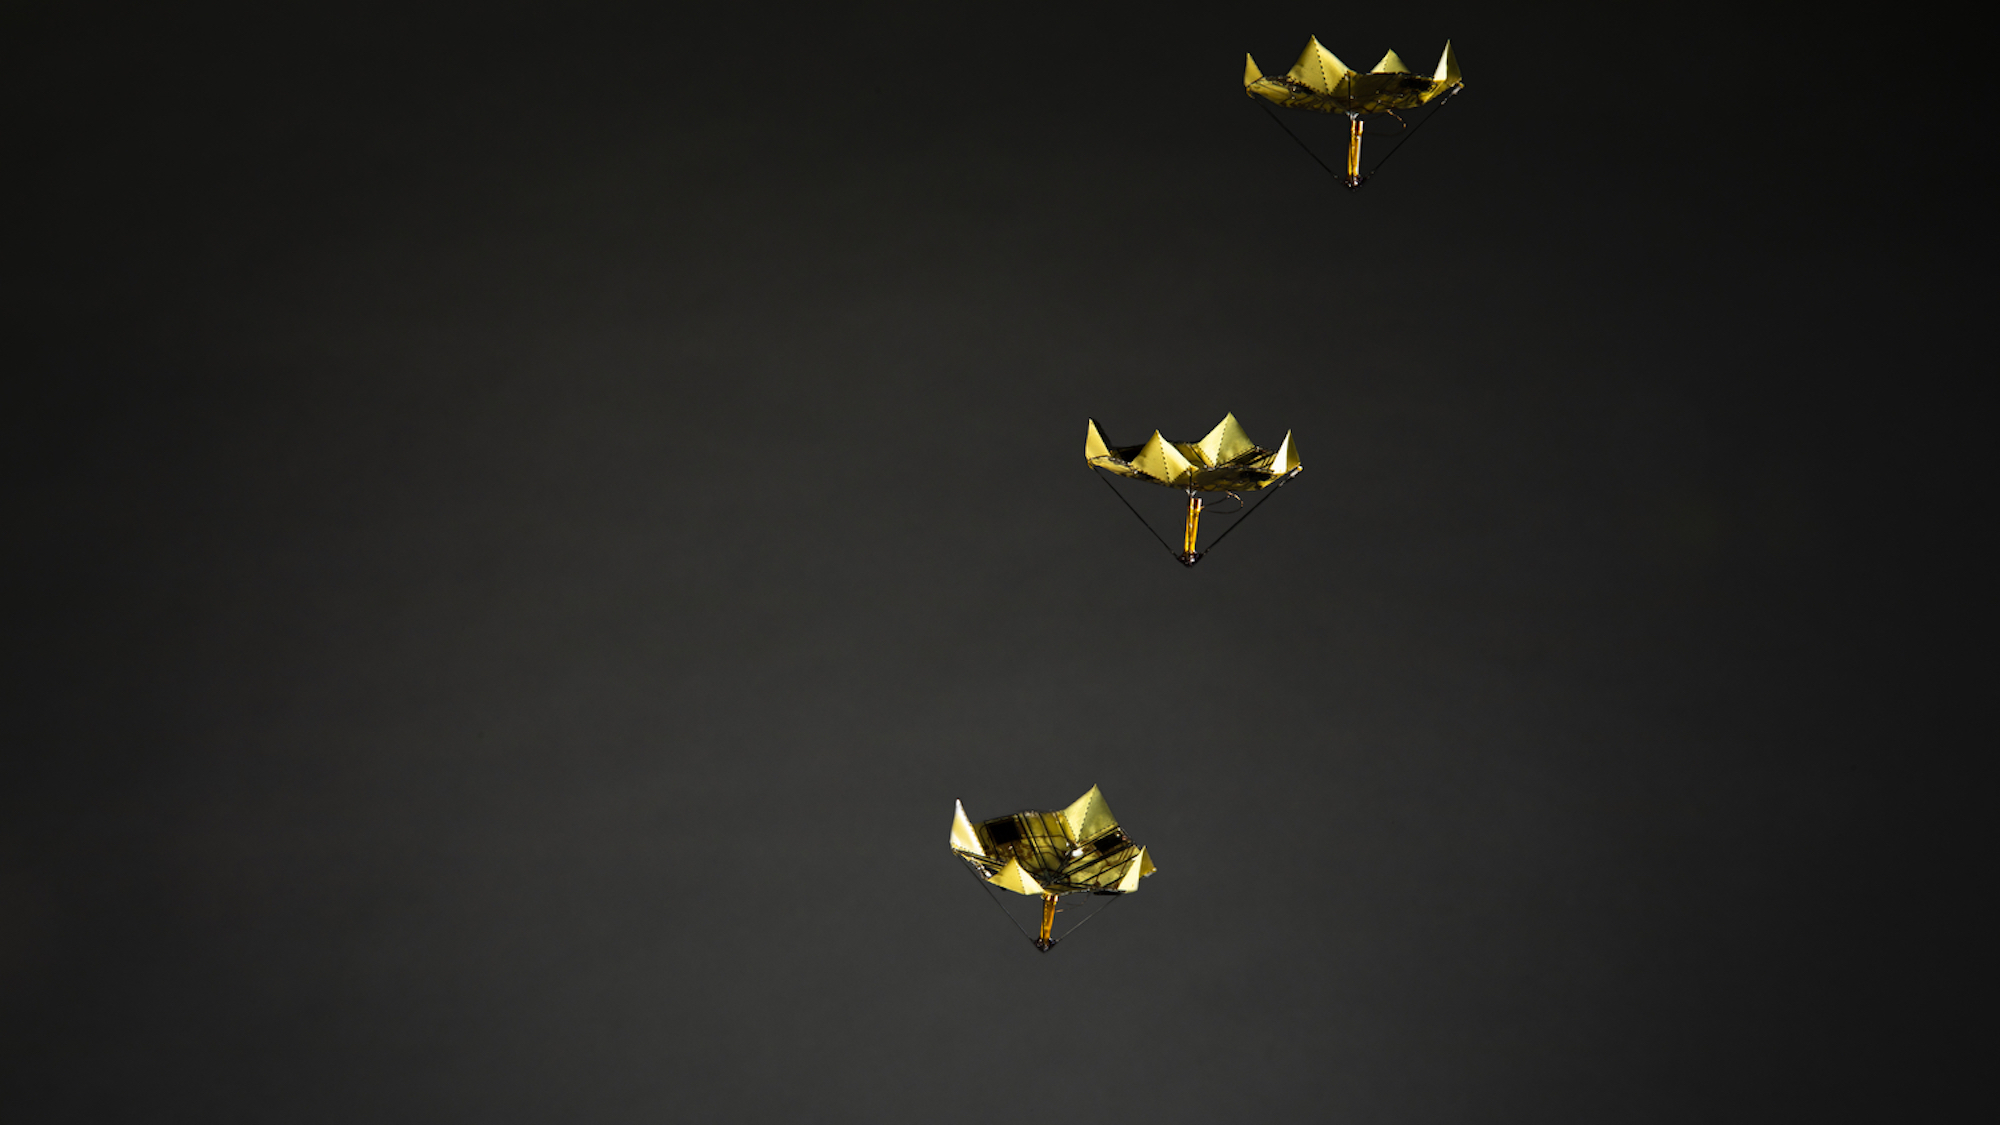 Time lapse image of origami microflier changing shape during descent